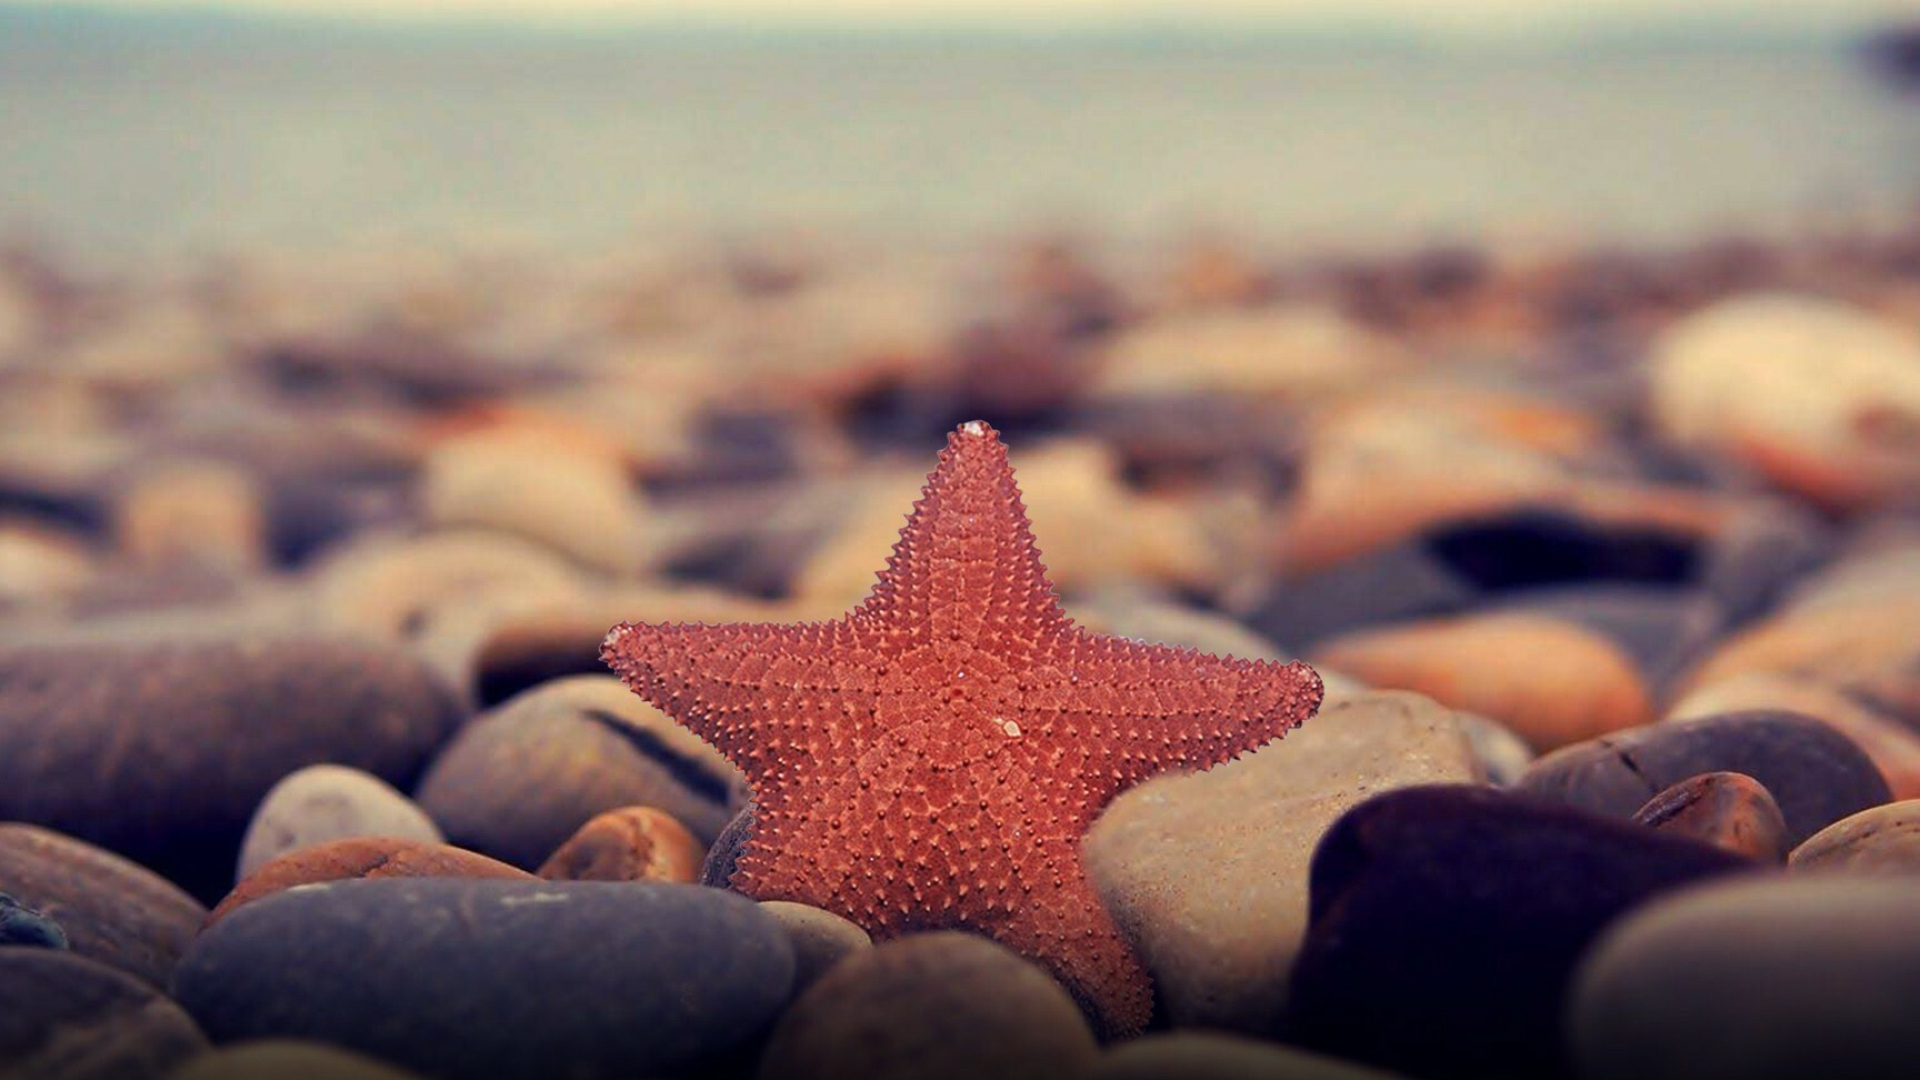 Starfish: Starfish Wallpapers posted by Samantha Sellers. 1920x1080 Full HD Wallpaper.